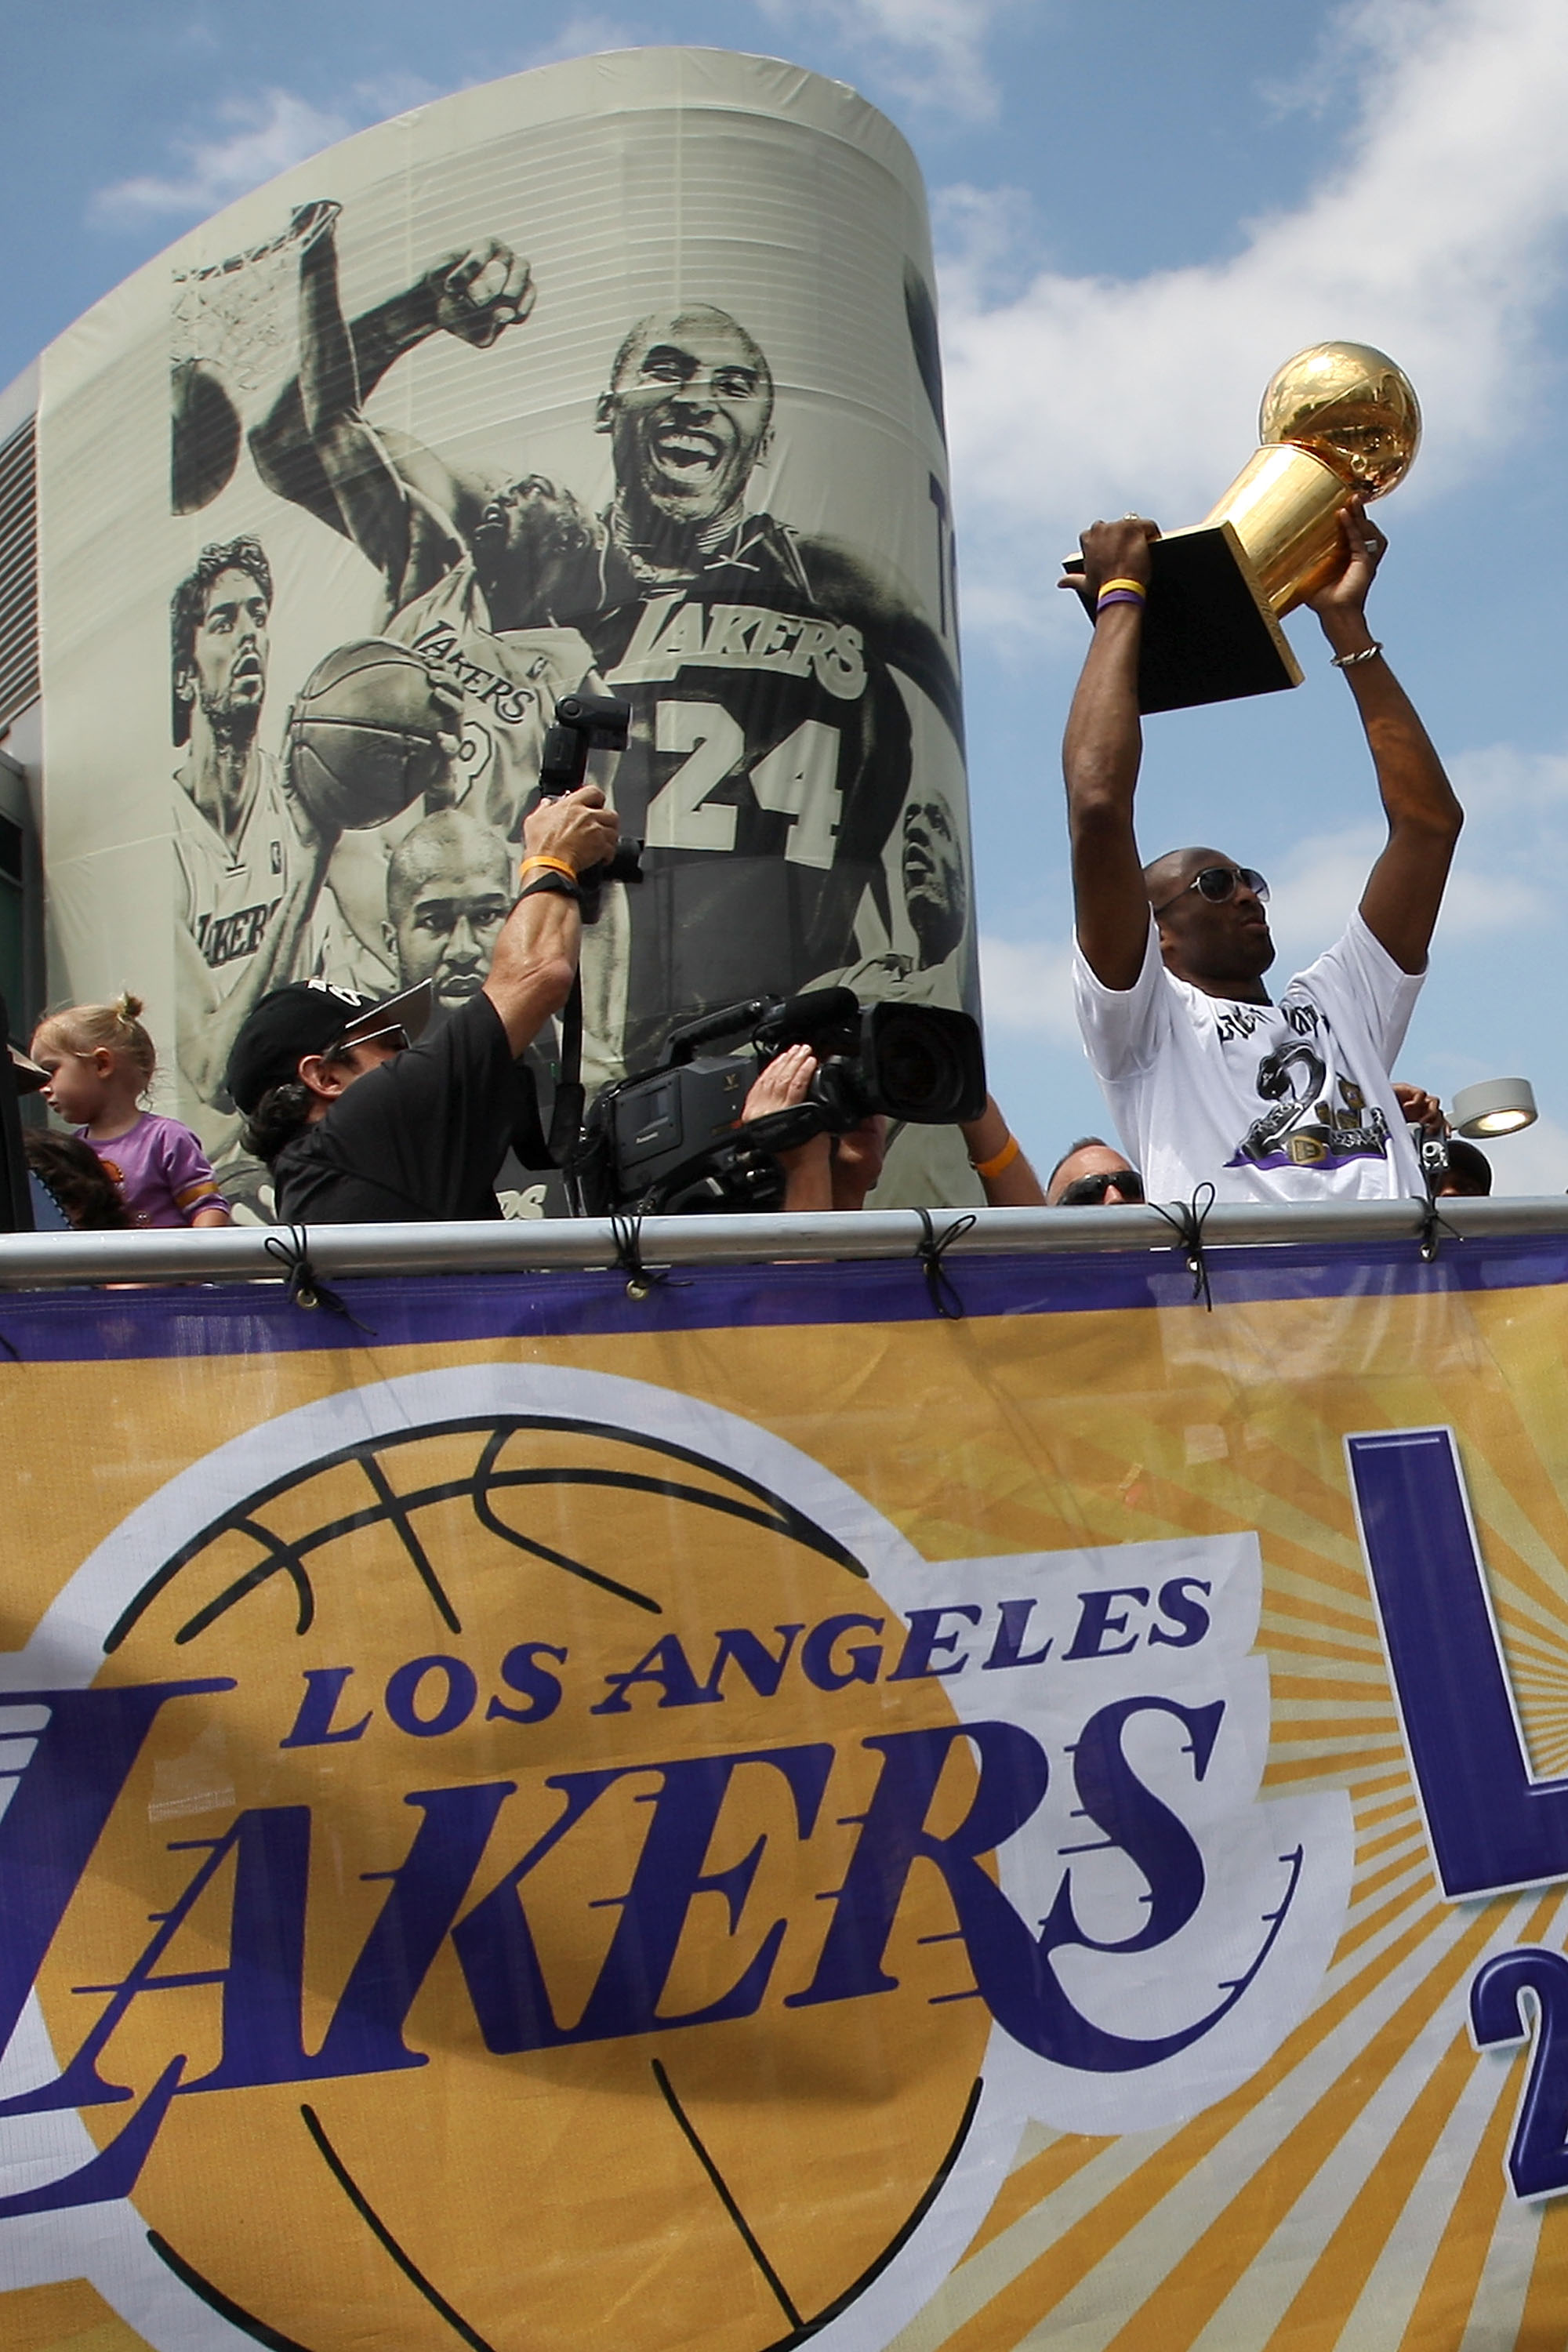 LOS ANGELES, CA - JUNE 21:  Los Angeles Lakers guard Kobe Bryant hoists the championship trophy as he rides past a mural featuring himself during the victory parade for the the NBA basketball champion team on June 21, 2010 in Los Angeles, California. The